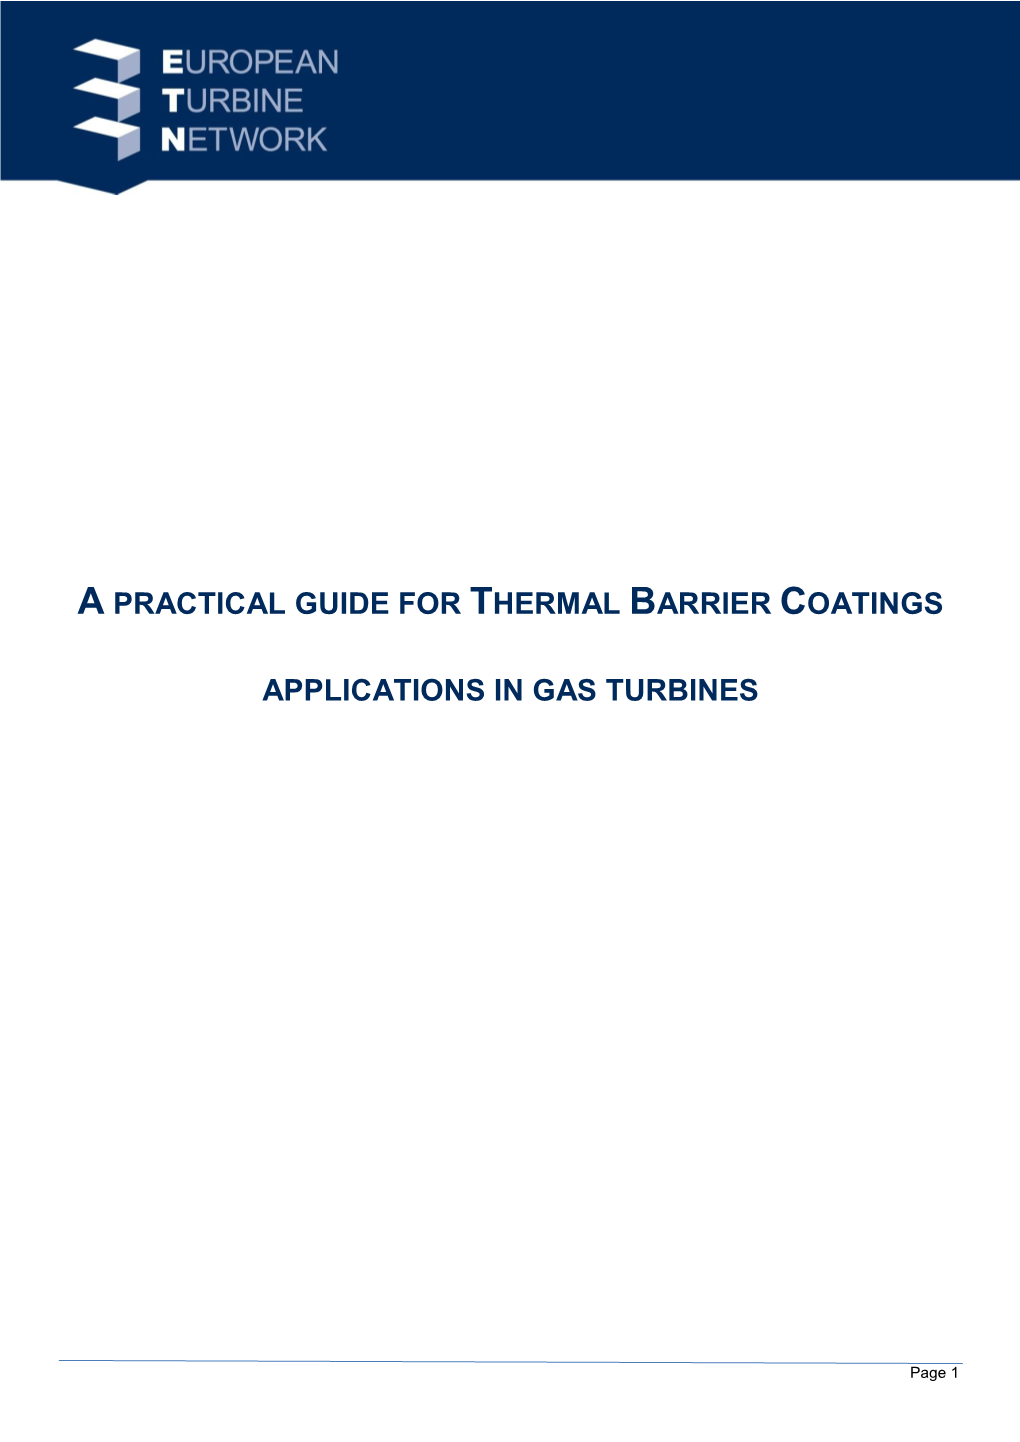 A Practical Guide for Thermal Barrier Coatings